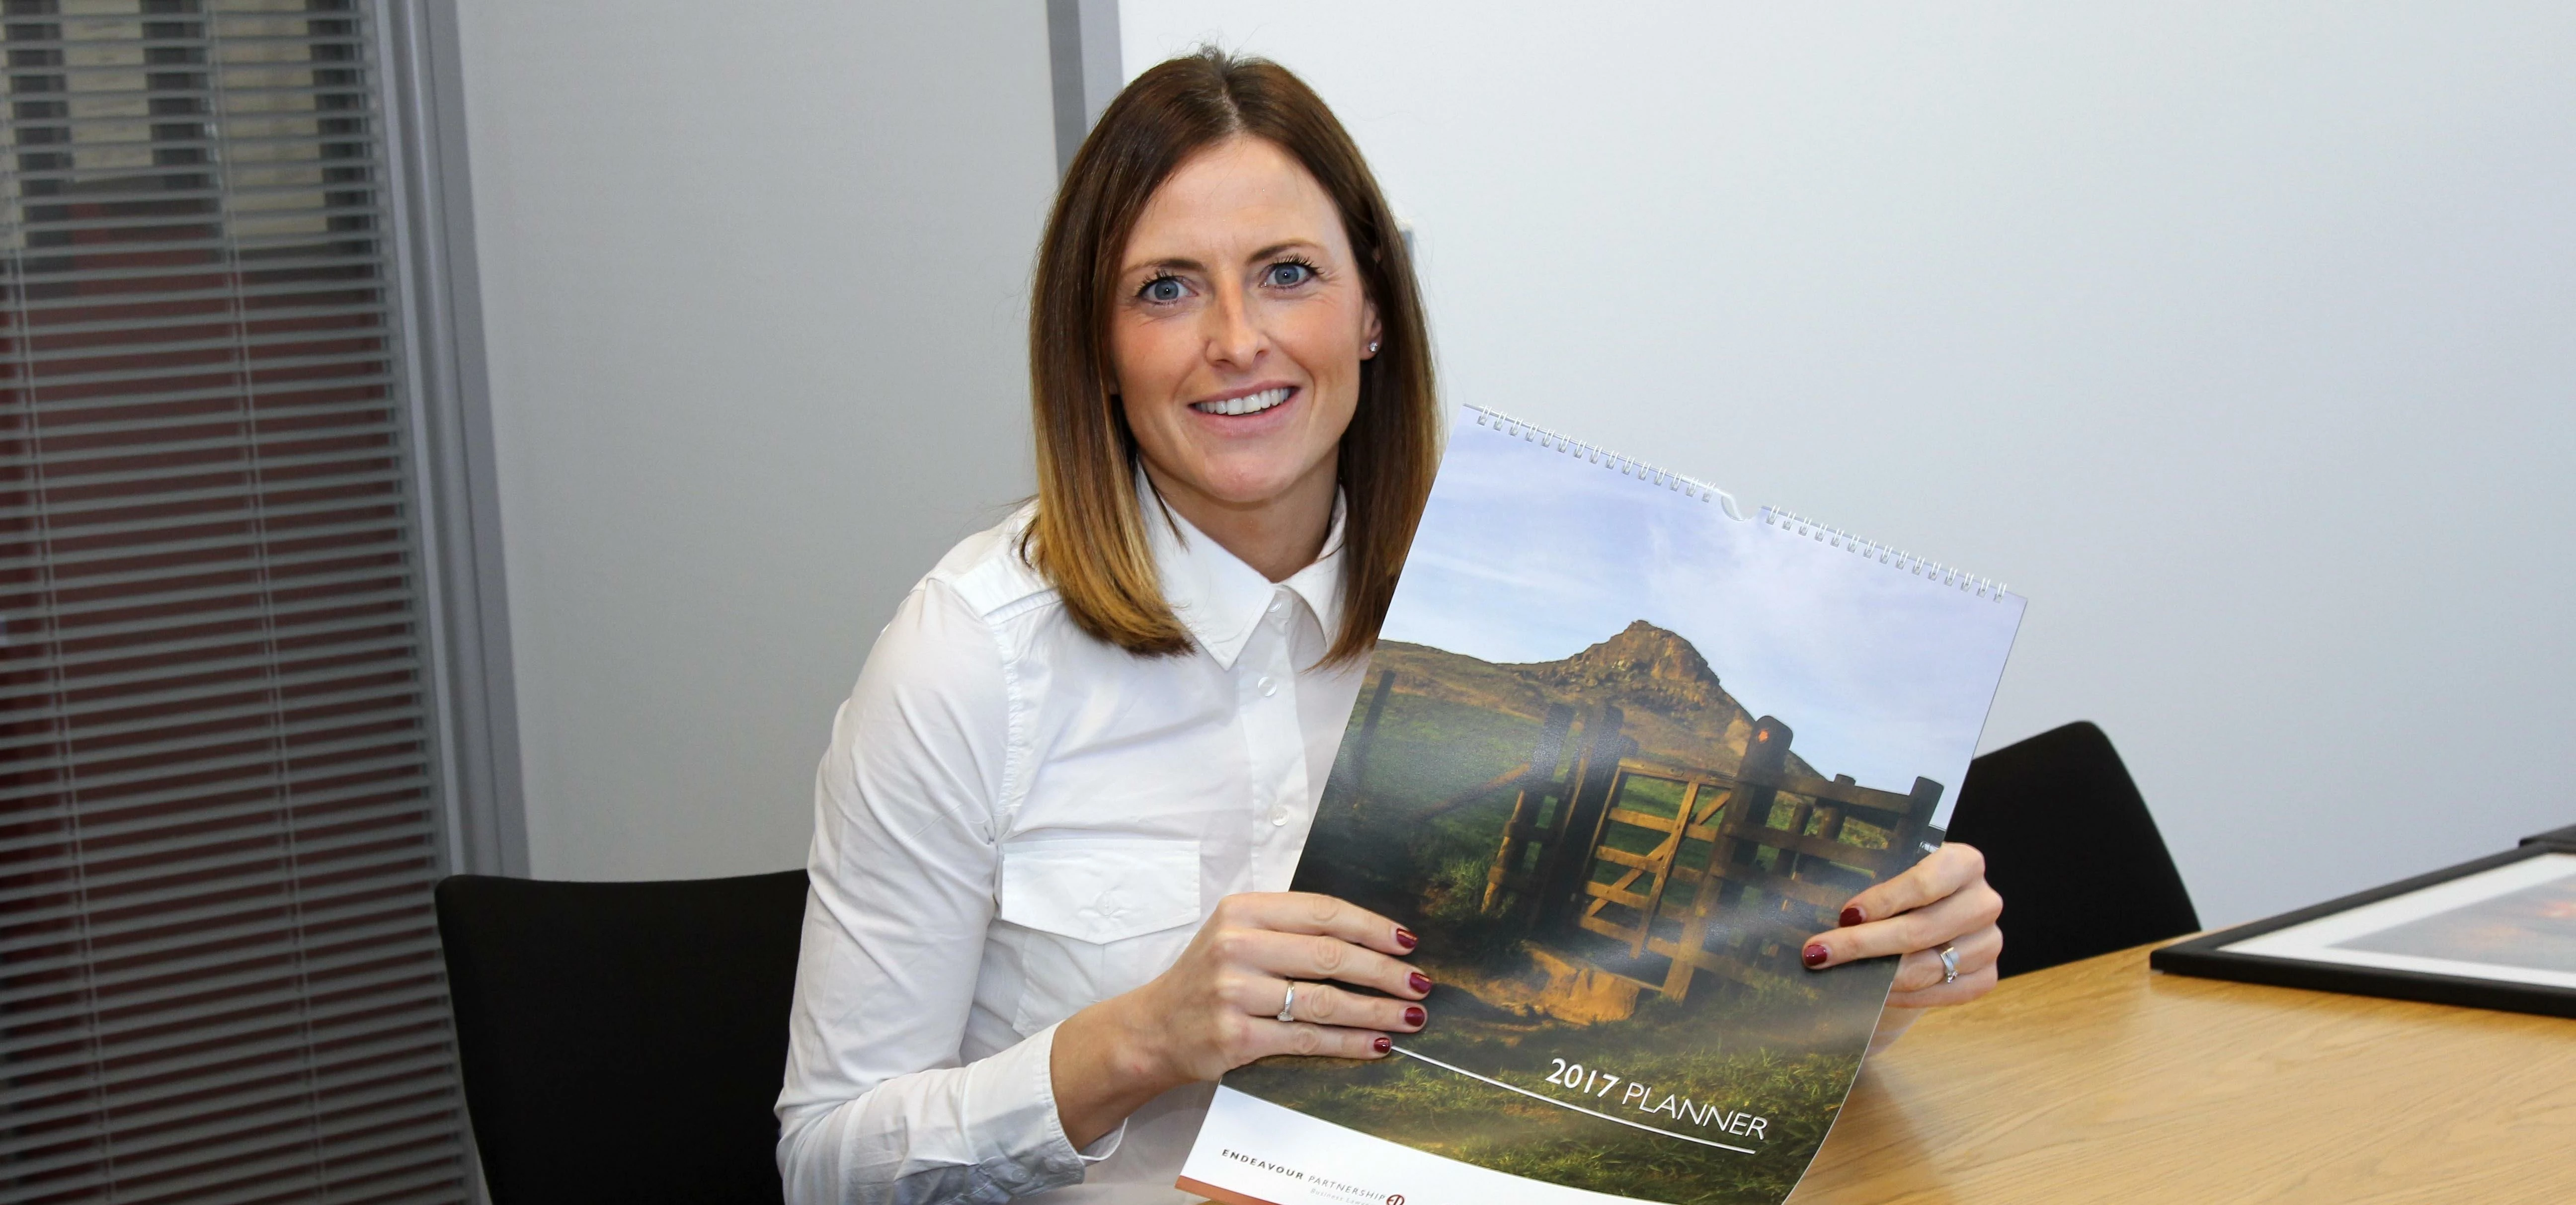 Catherine Devereux with the planners